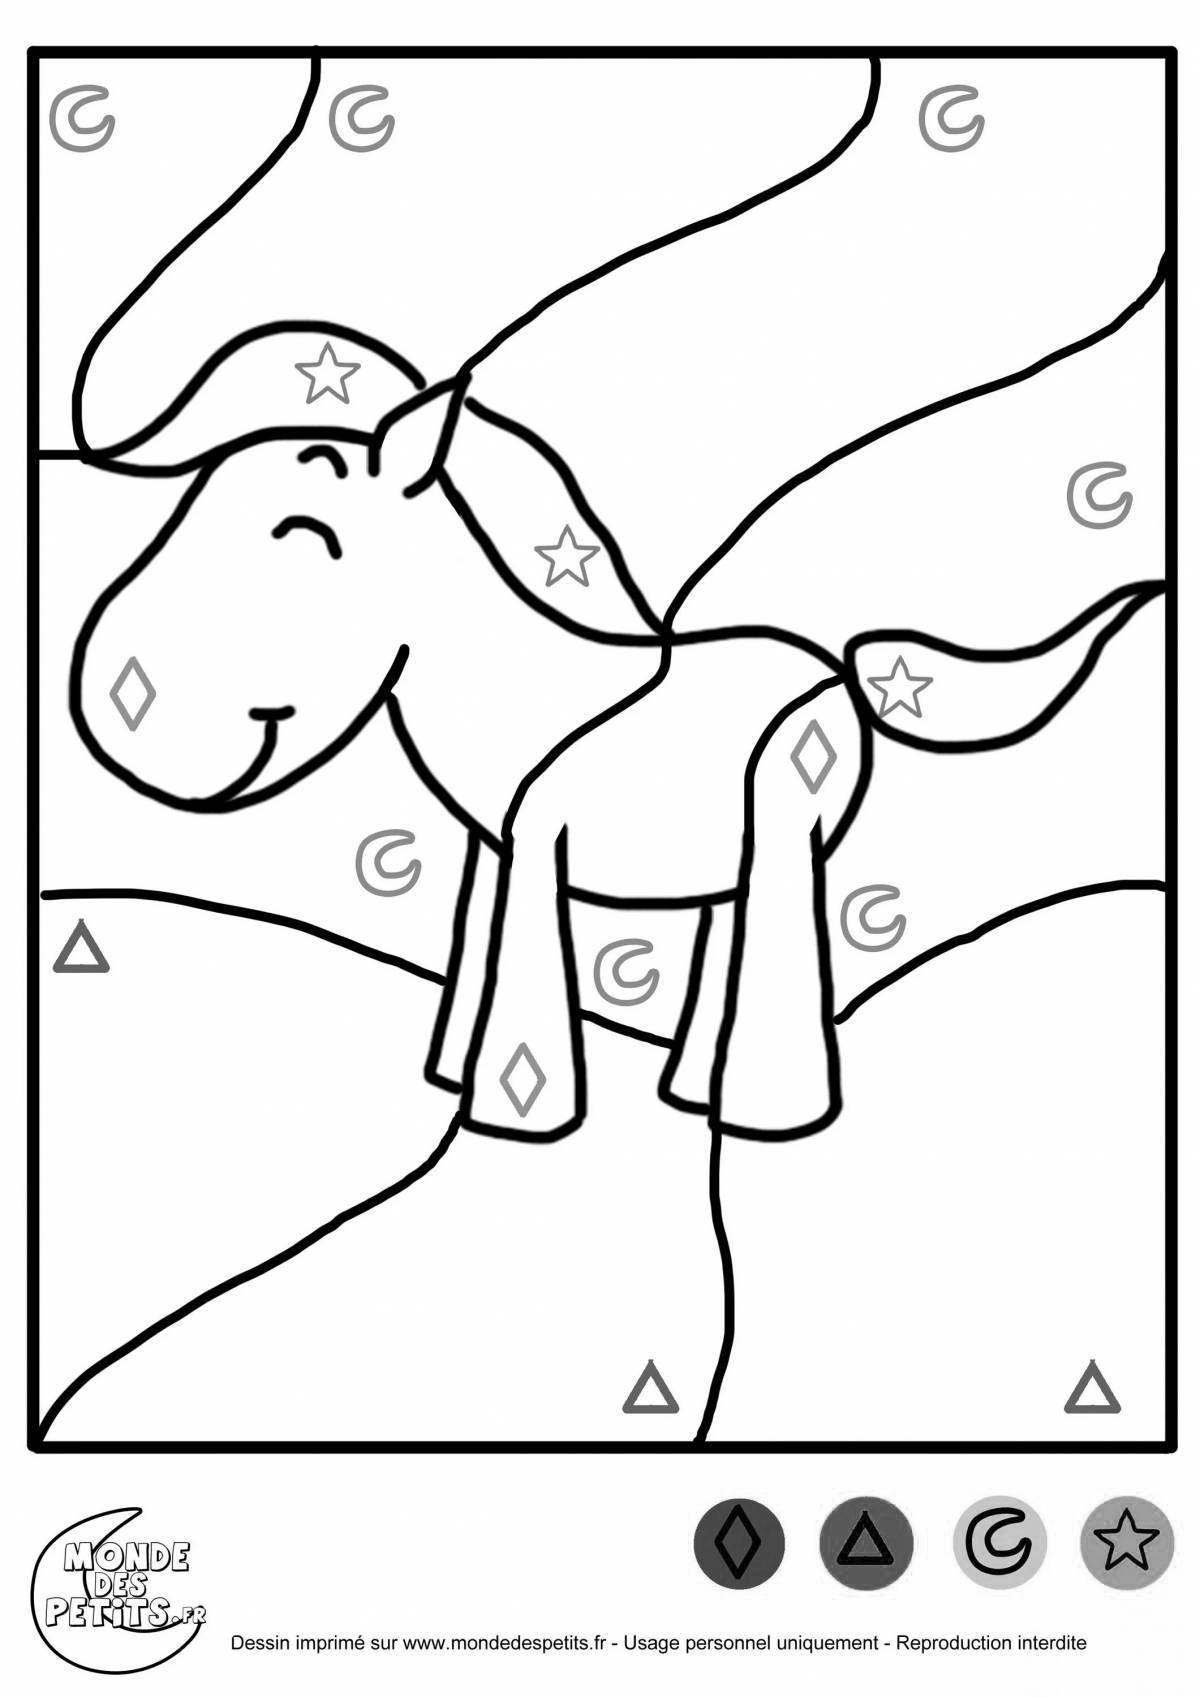 Adorable unicorn coloring by numbers for kids